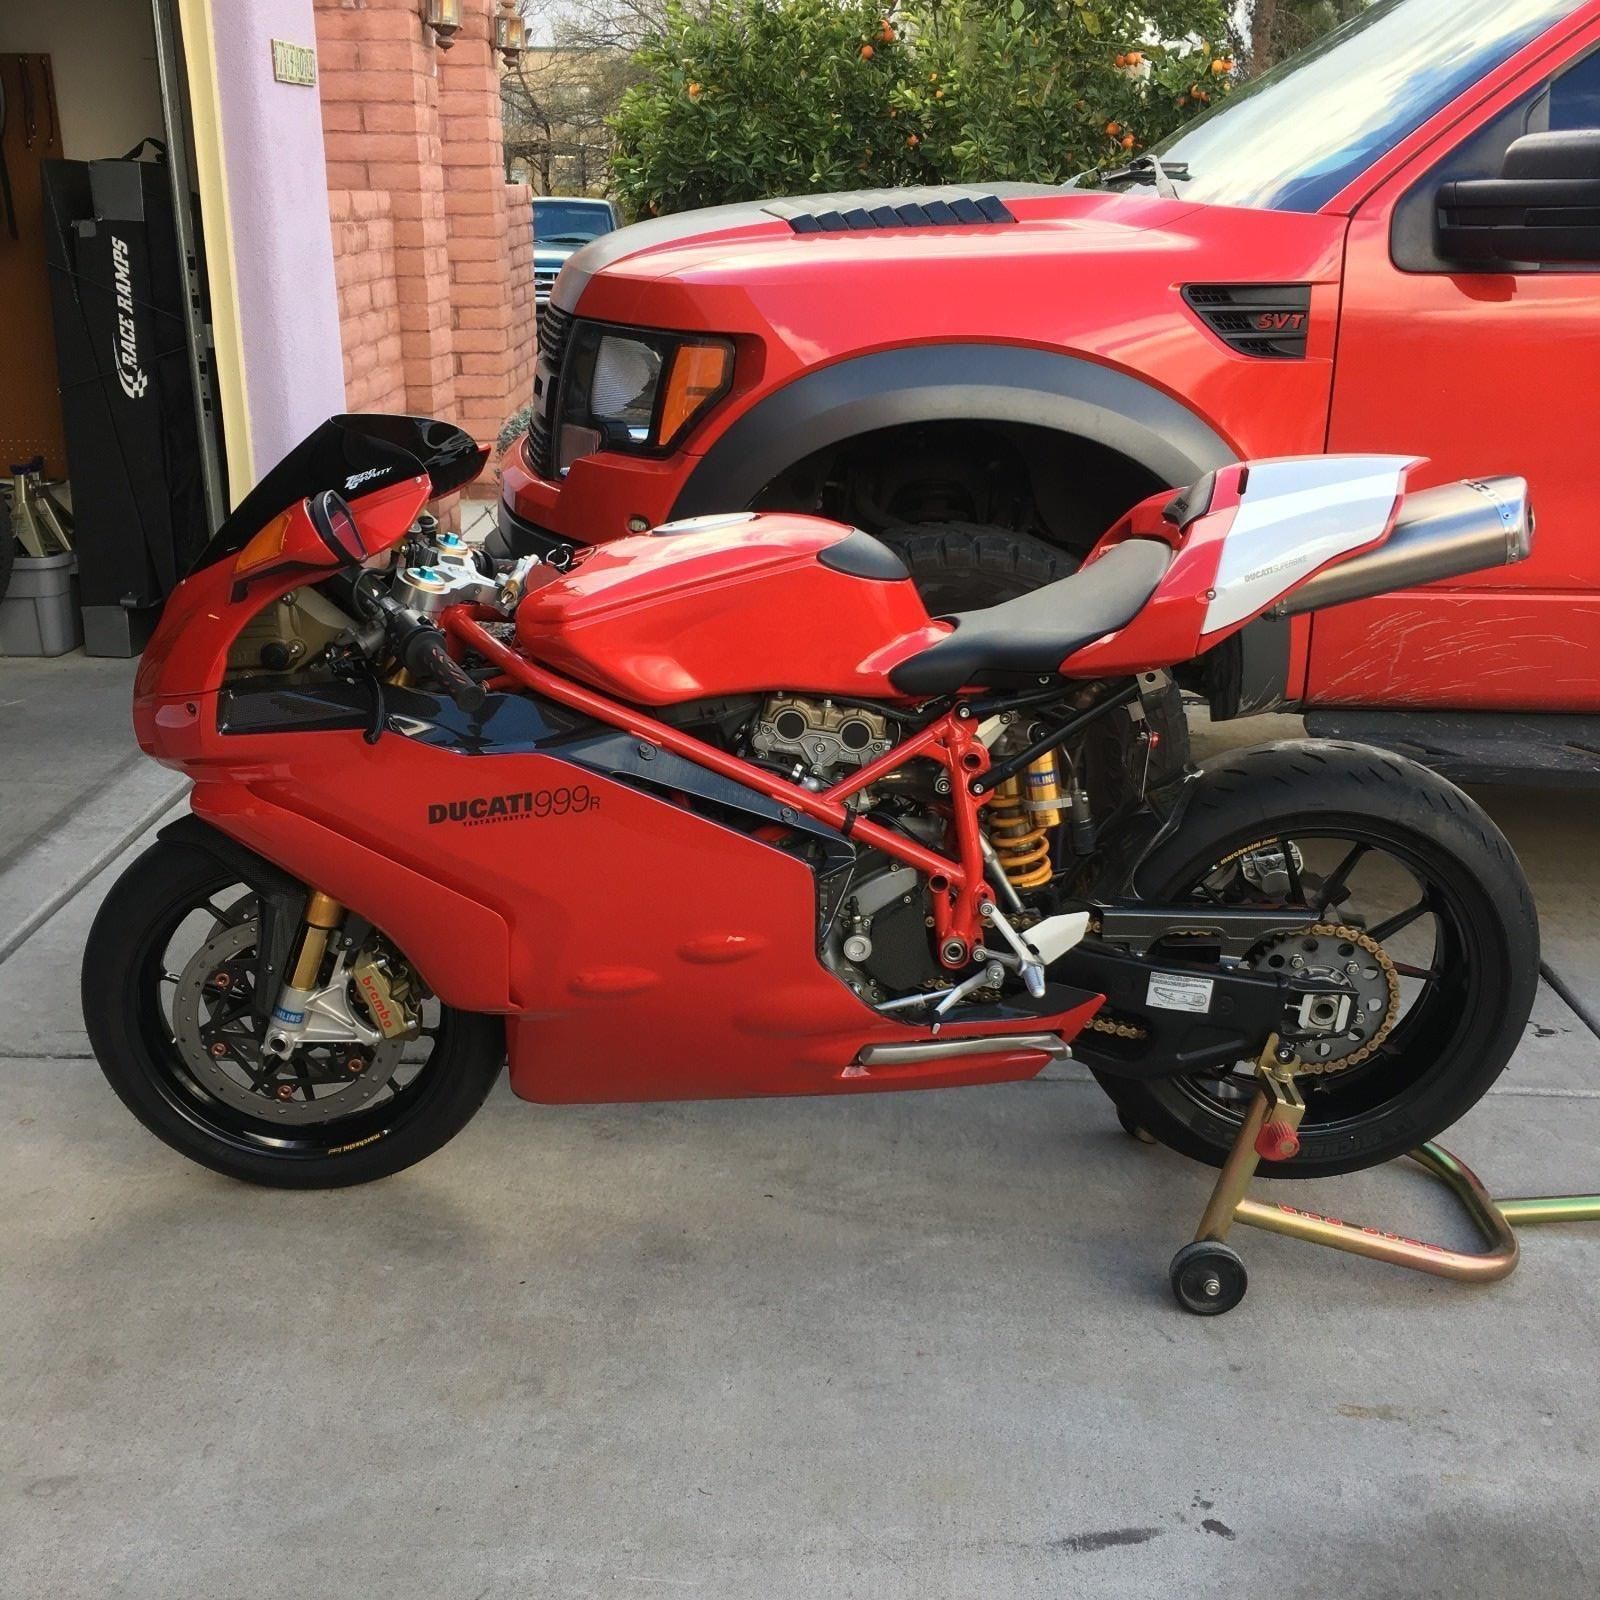 2006 Ducati 999R parked outside